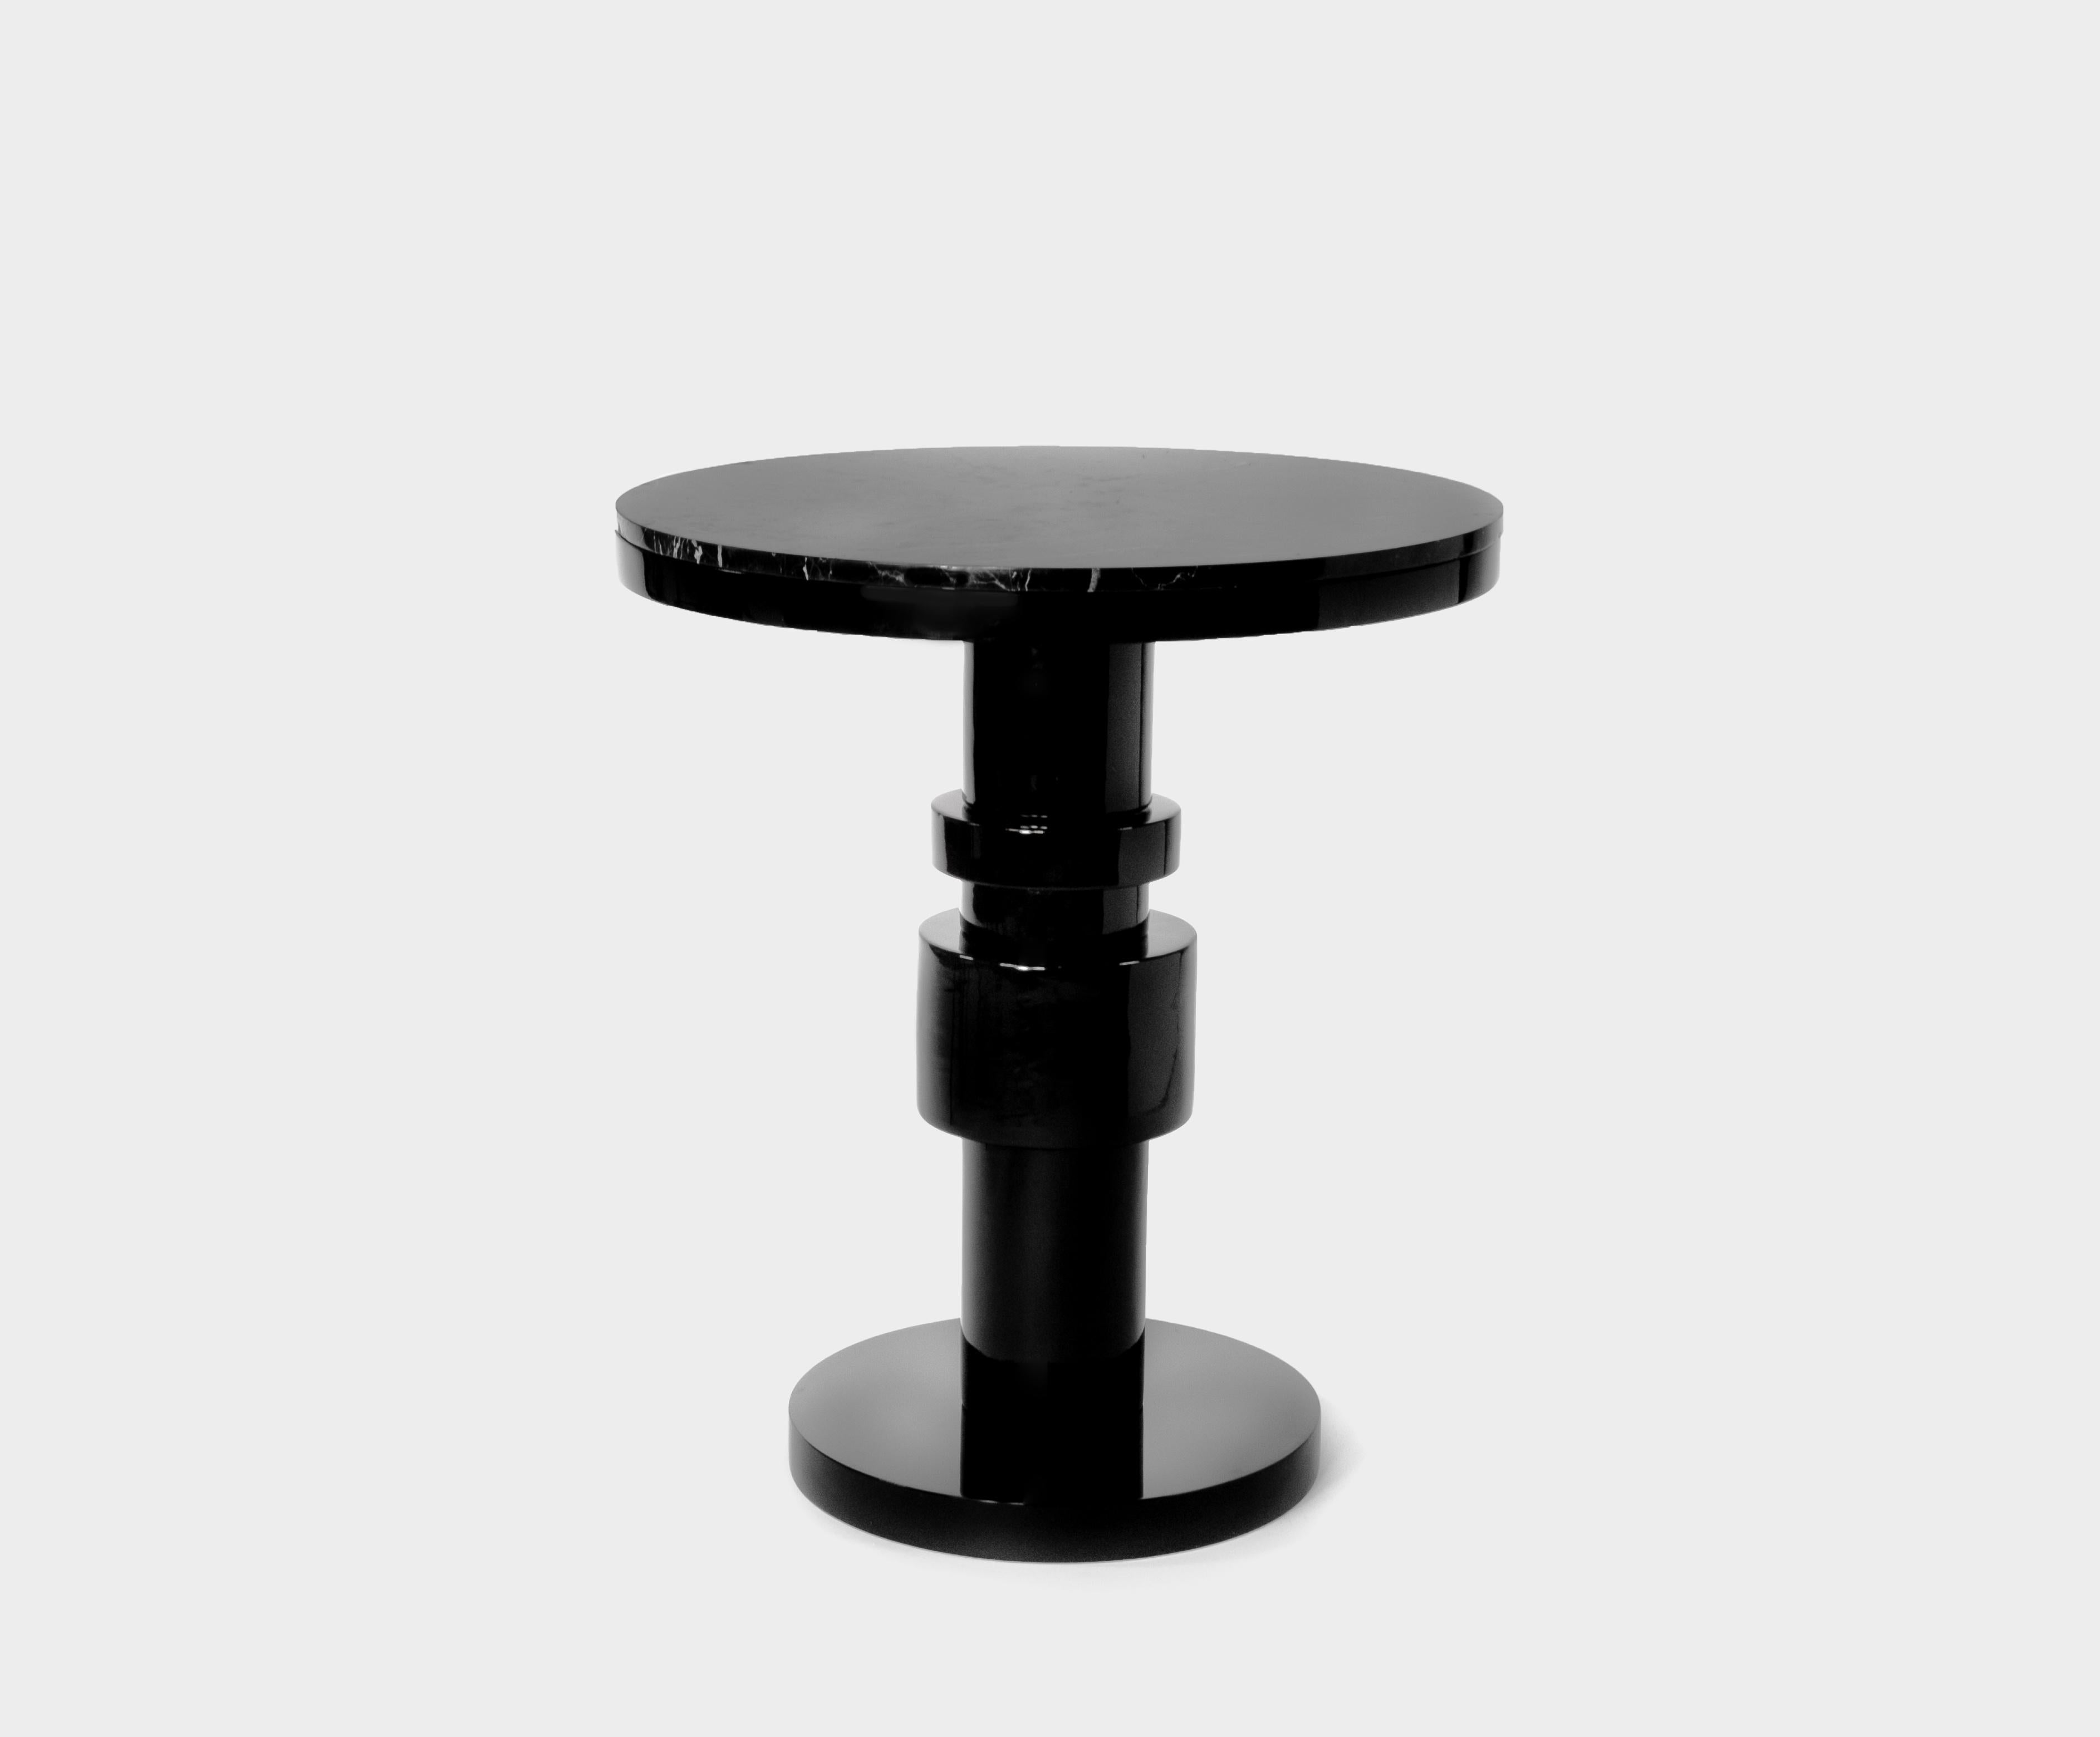 Ceramic and marble pedestal table by Eric Willemart
Materials: top: Polished Nero Marquina marble plate embedded in a
 black lacquered wooden tray
 Body: Handcrafted ceramic glazed in black
 Base: Black lacquered wood on an aluminium